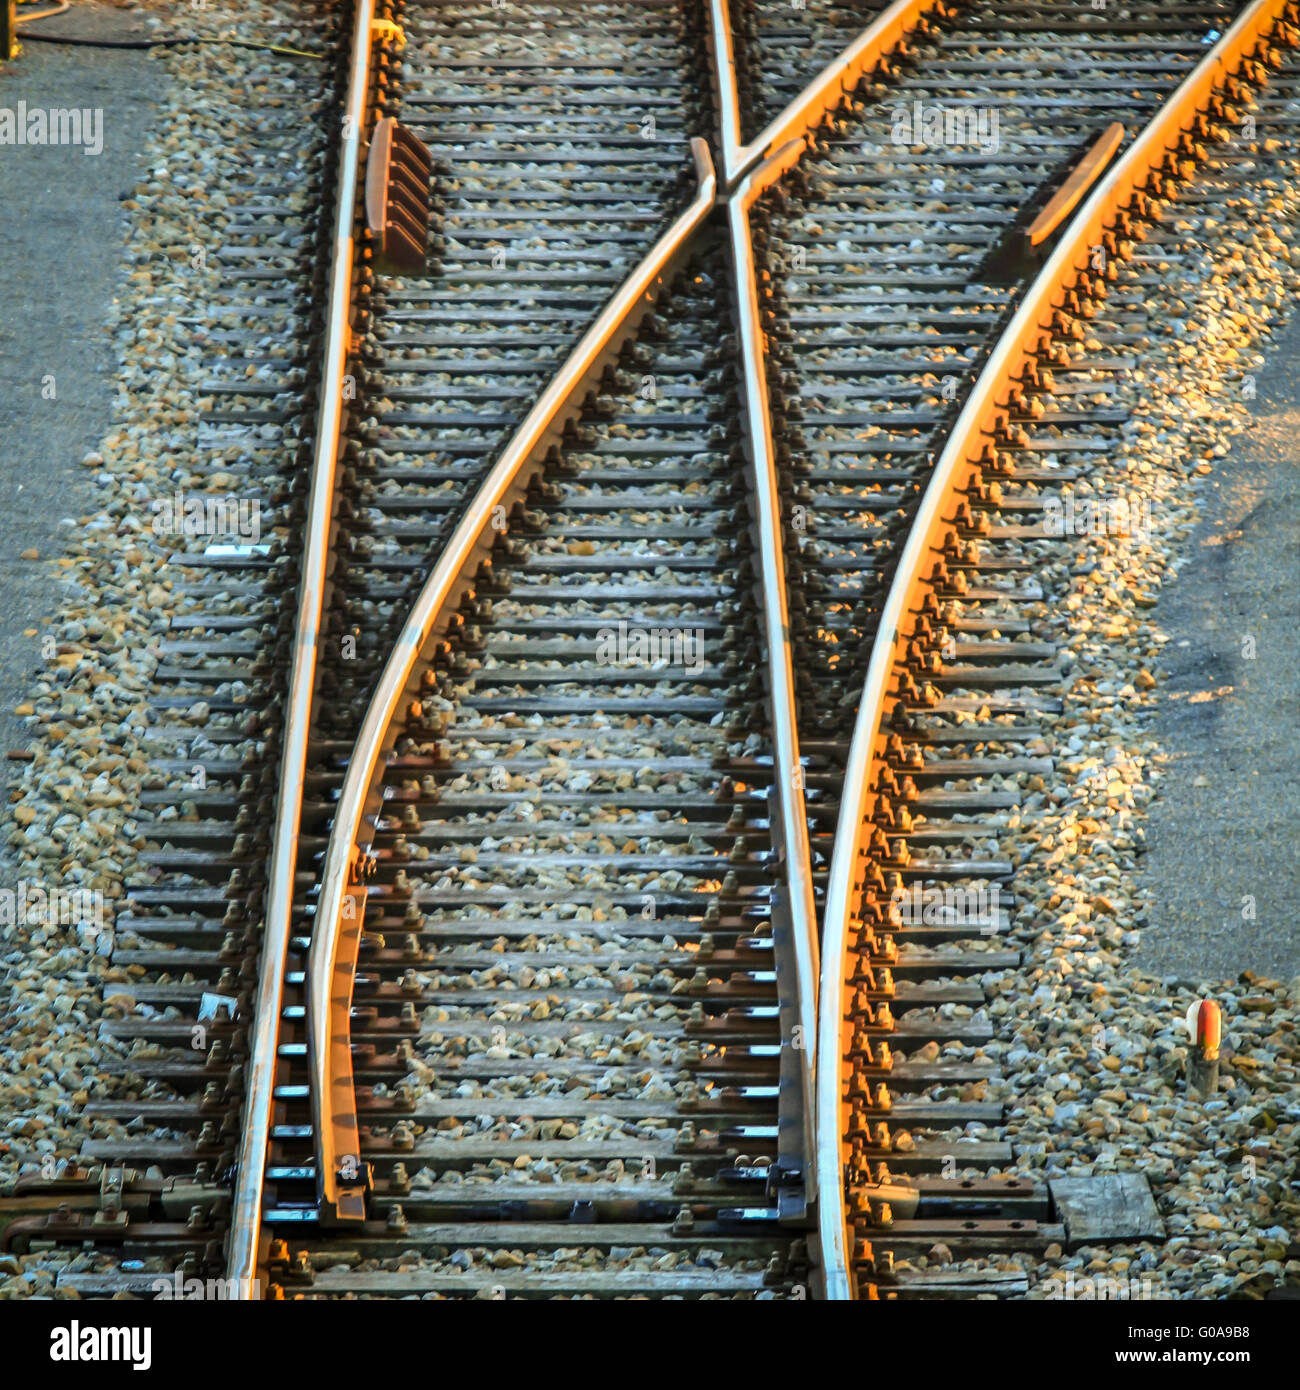 Train tracks with points in square format Stock Photo